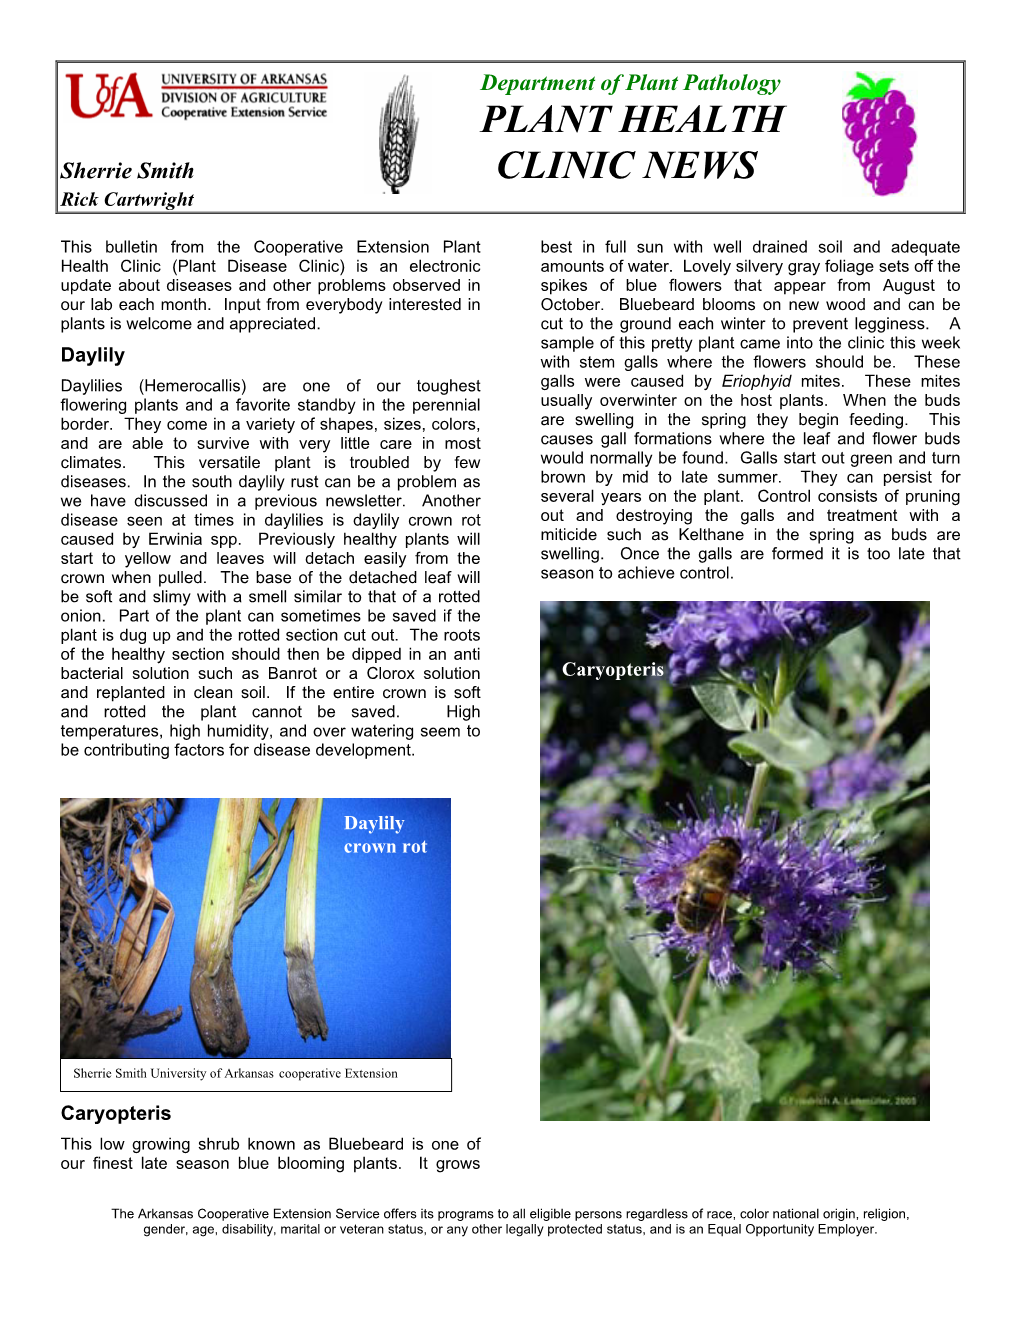 Plant Health Clinic News, Issue 16, 2006